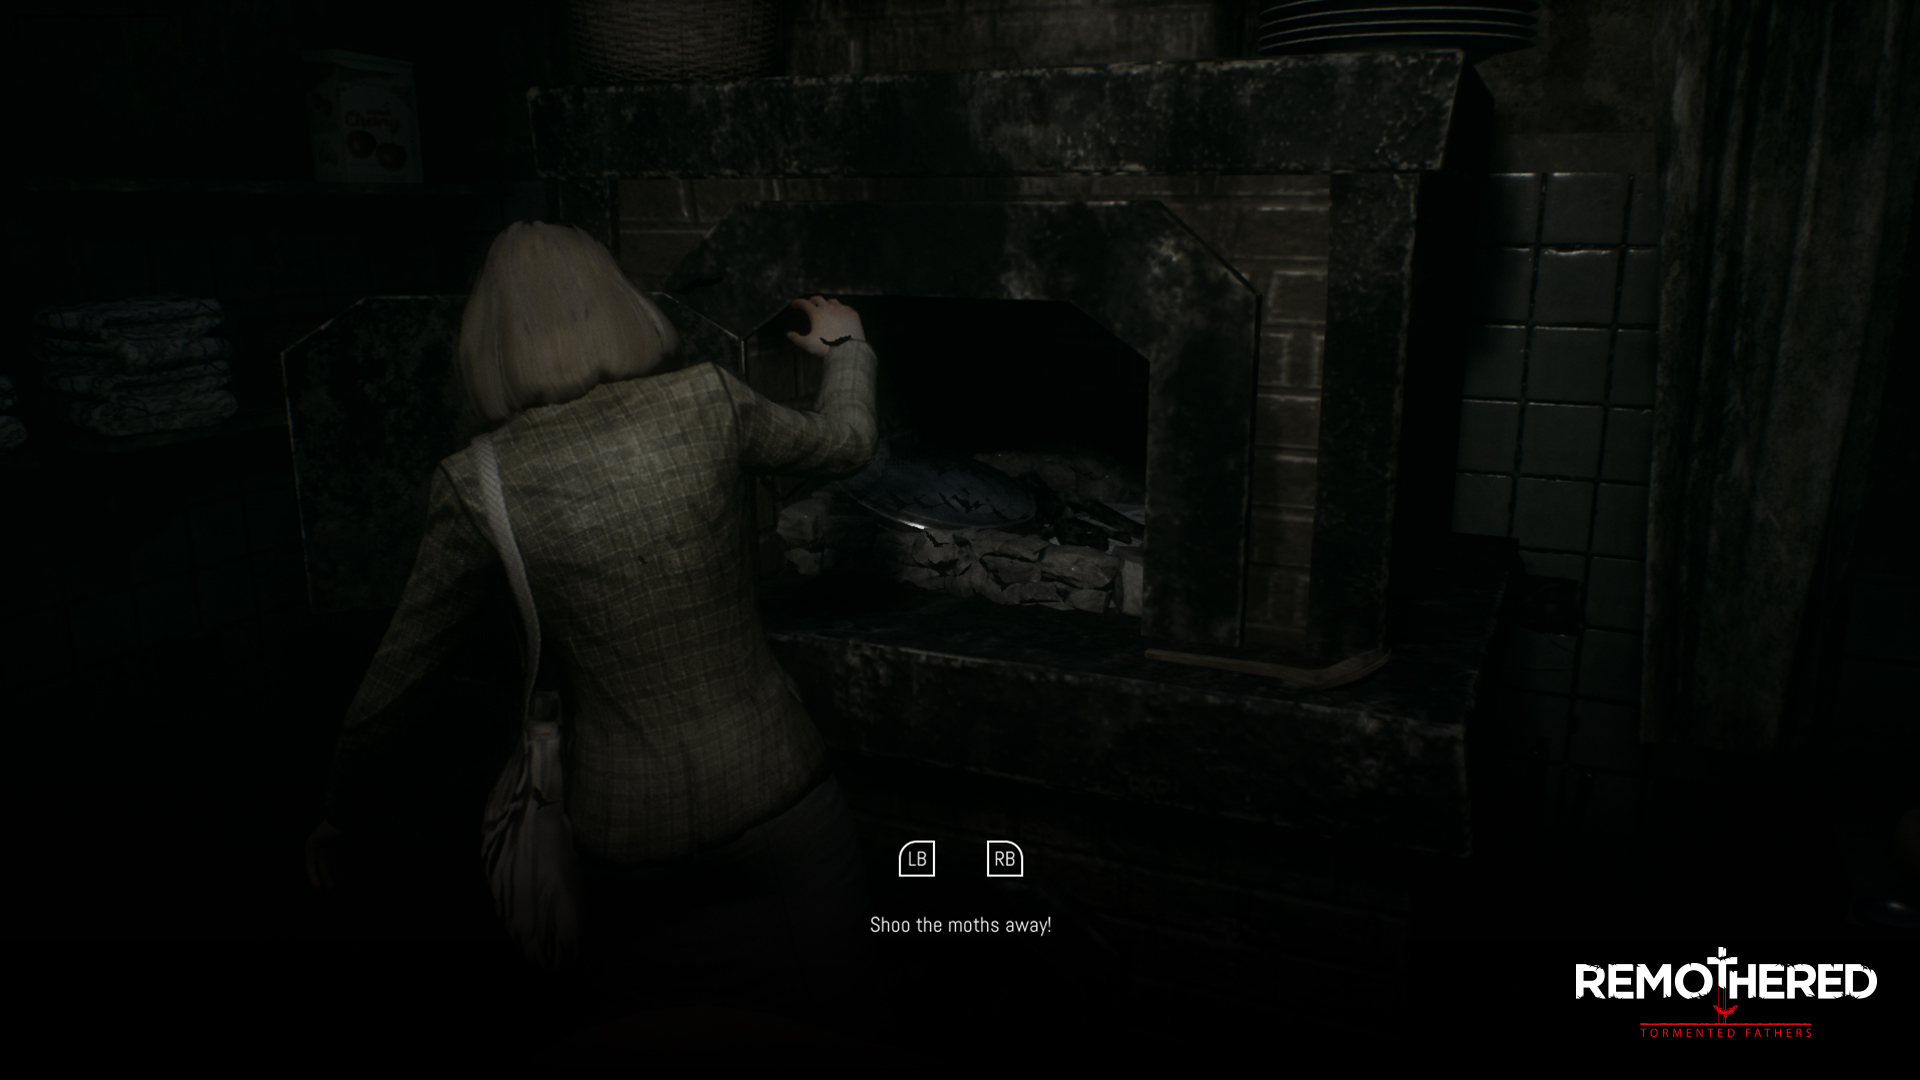 http://www.remothered.com/wp-content/uploads/2018/01/Remothered-Full-Release-Screen-07.jpg